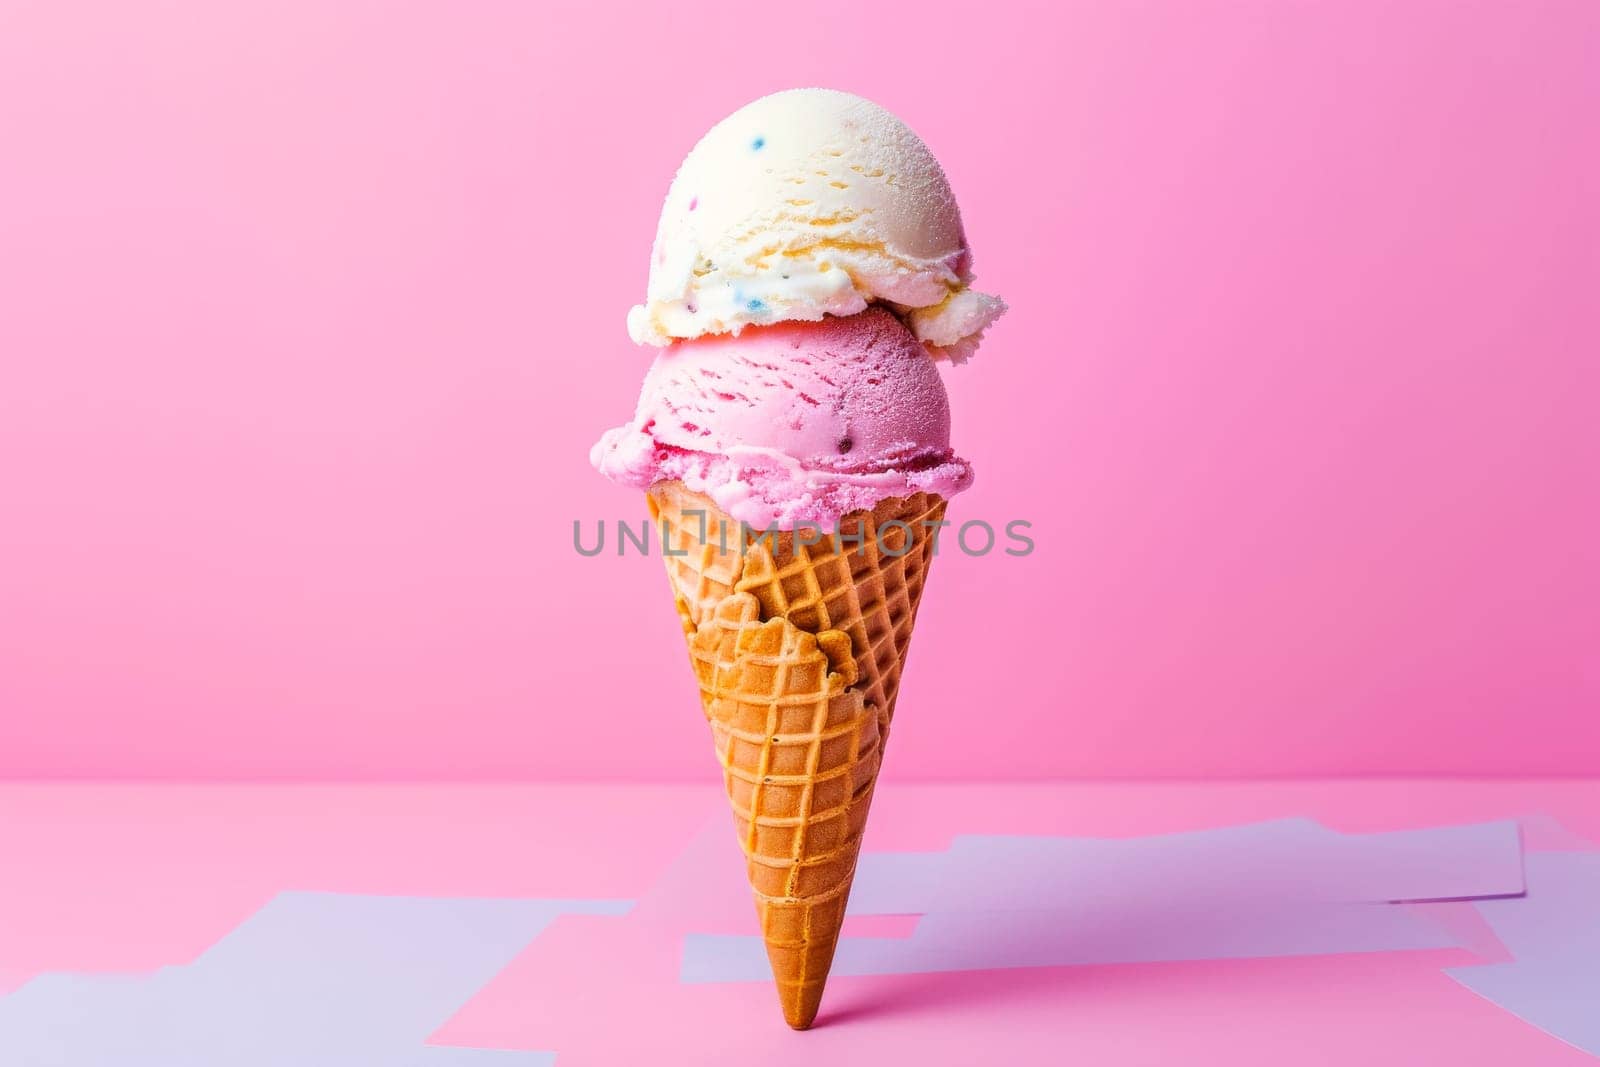 A vladimka ice cream cone perfectly placed on a pastel pink background, creating a striking contrast.